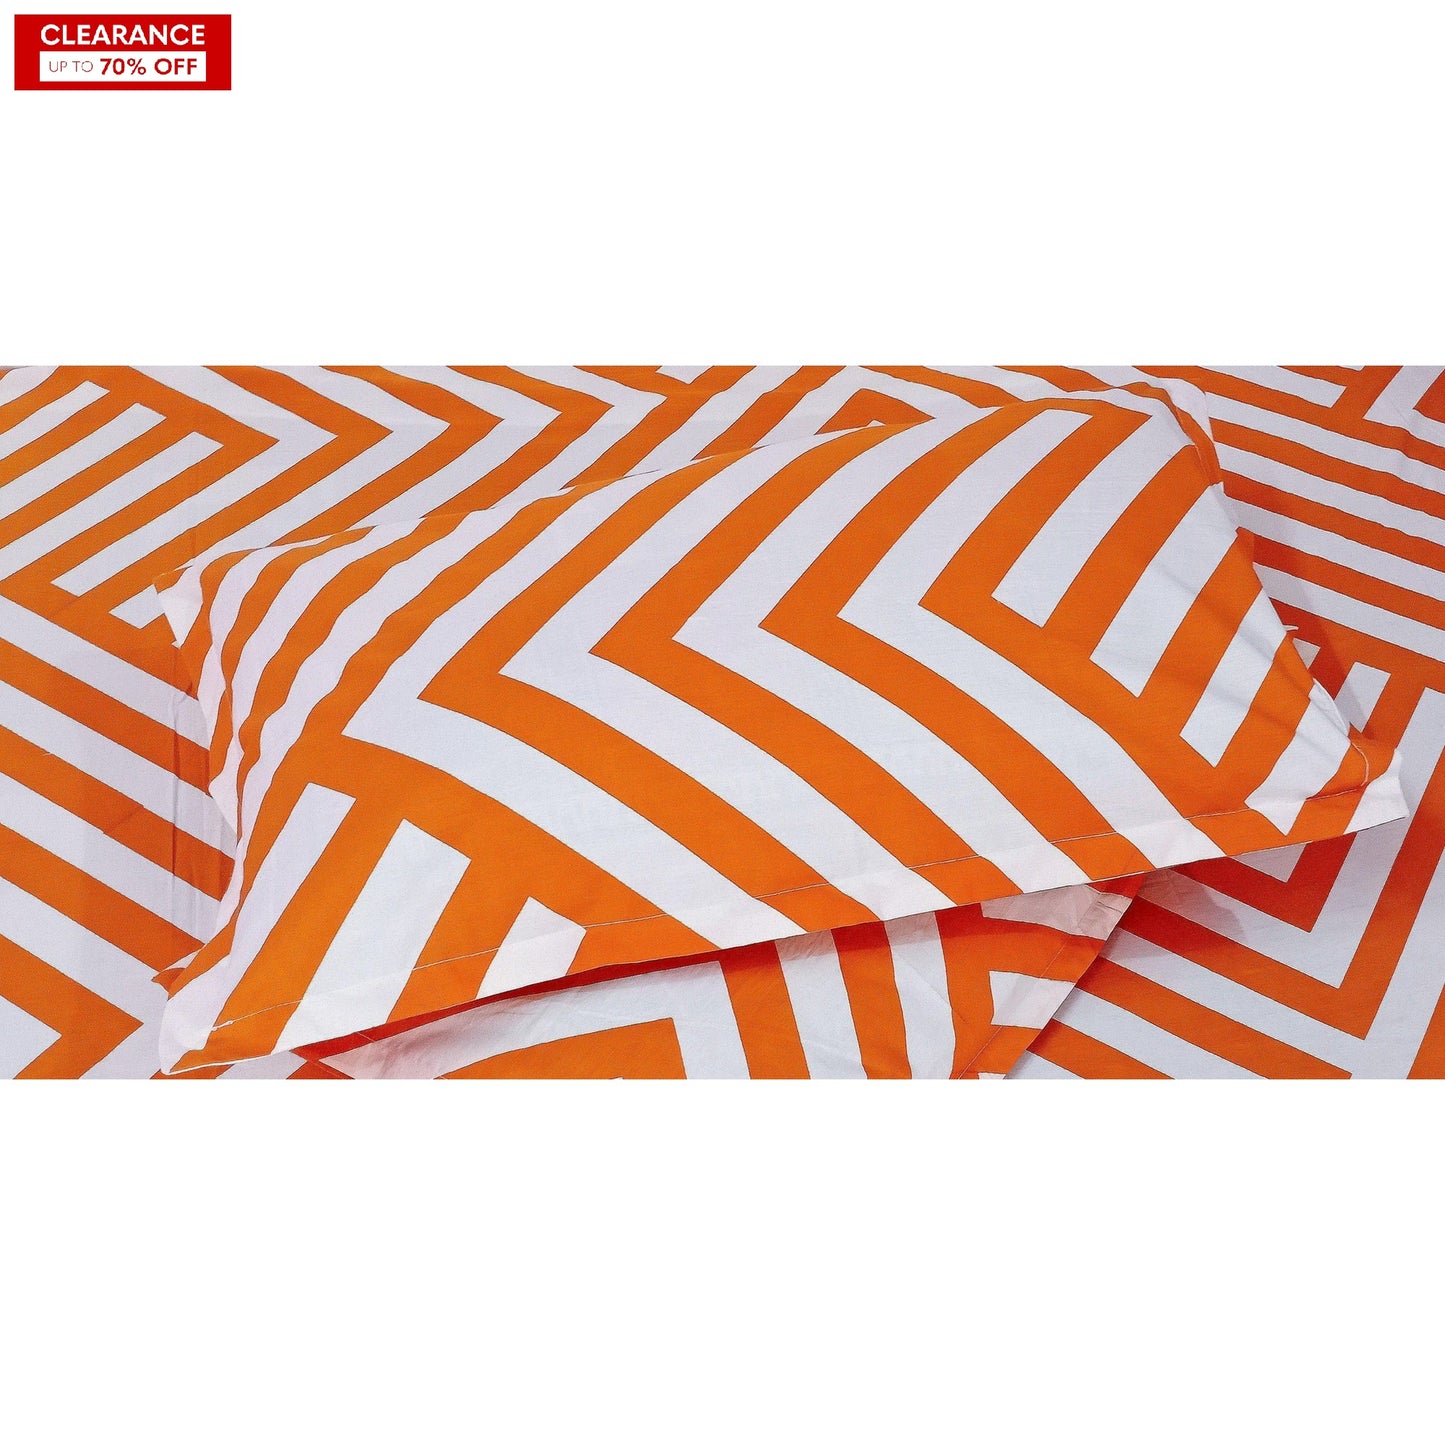 Pair of Pillow cover- Orange Stripes Bordered. - The Teal Thread